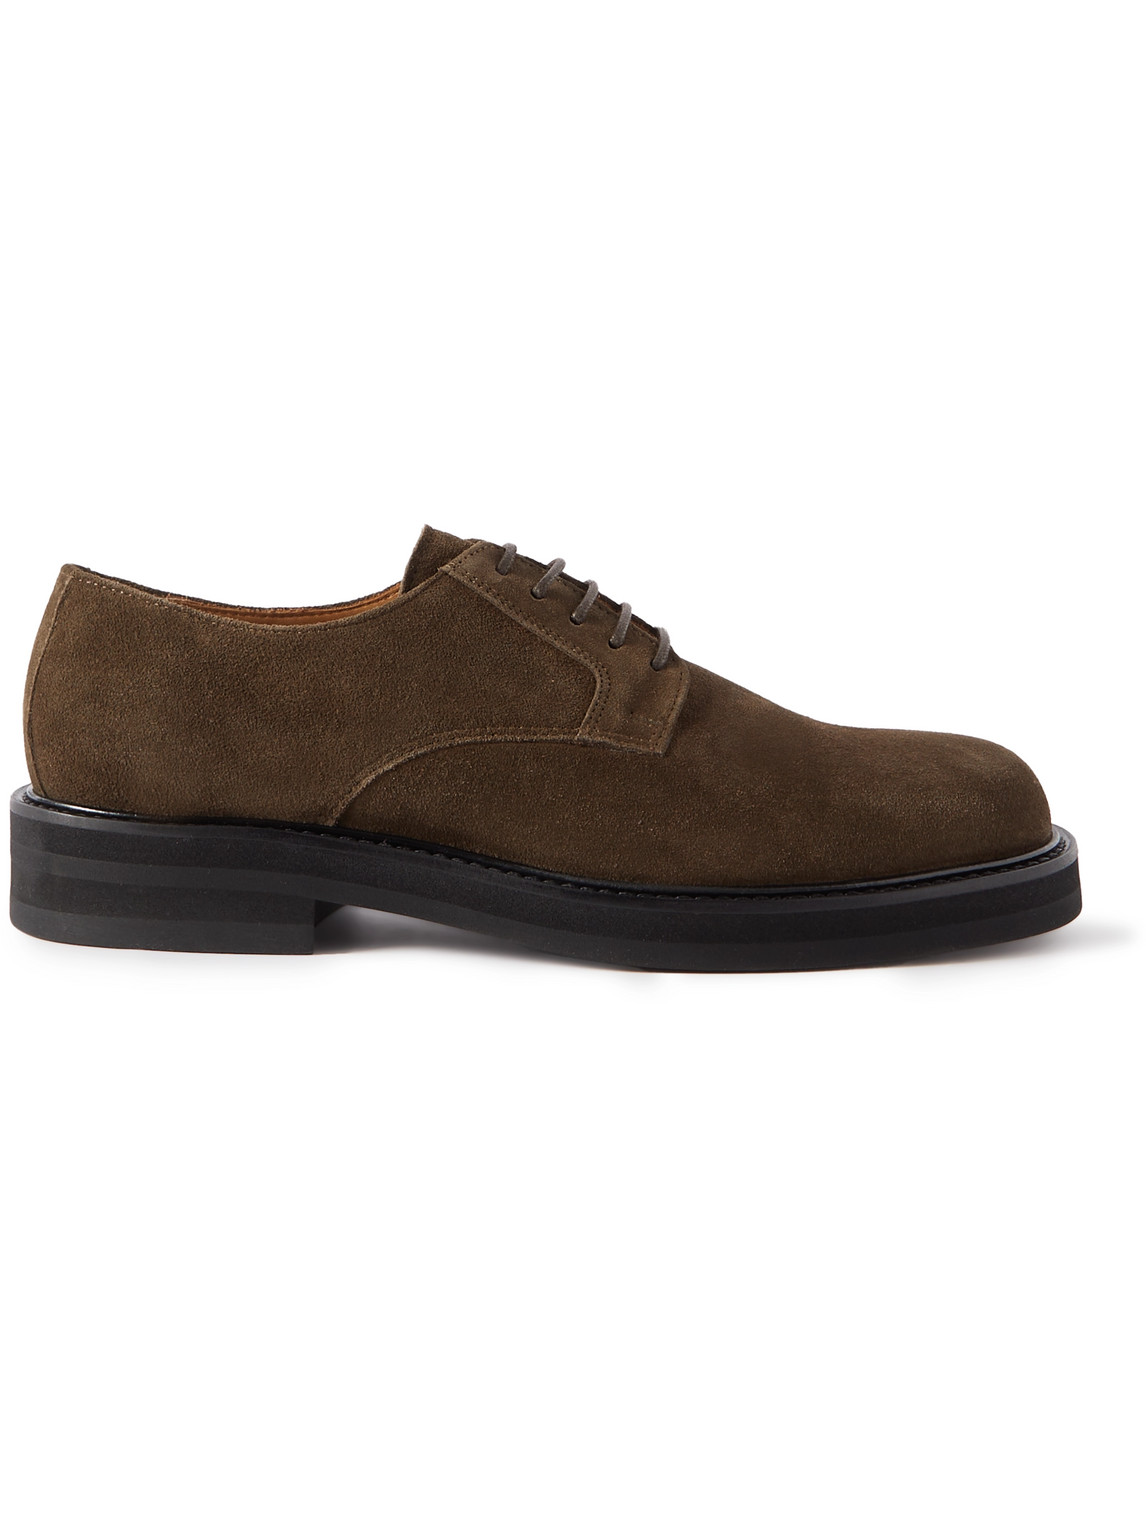 Jacques Regenerated Suede by evolo® Derby Shoes